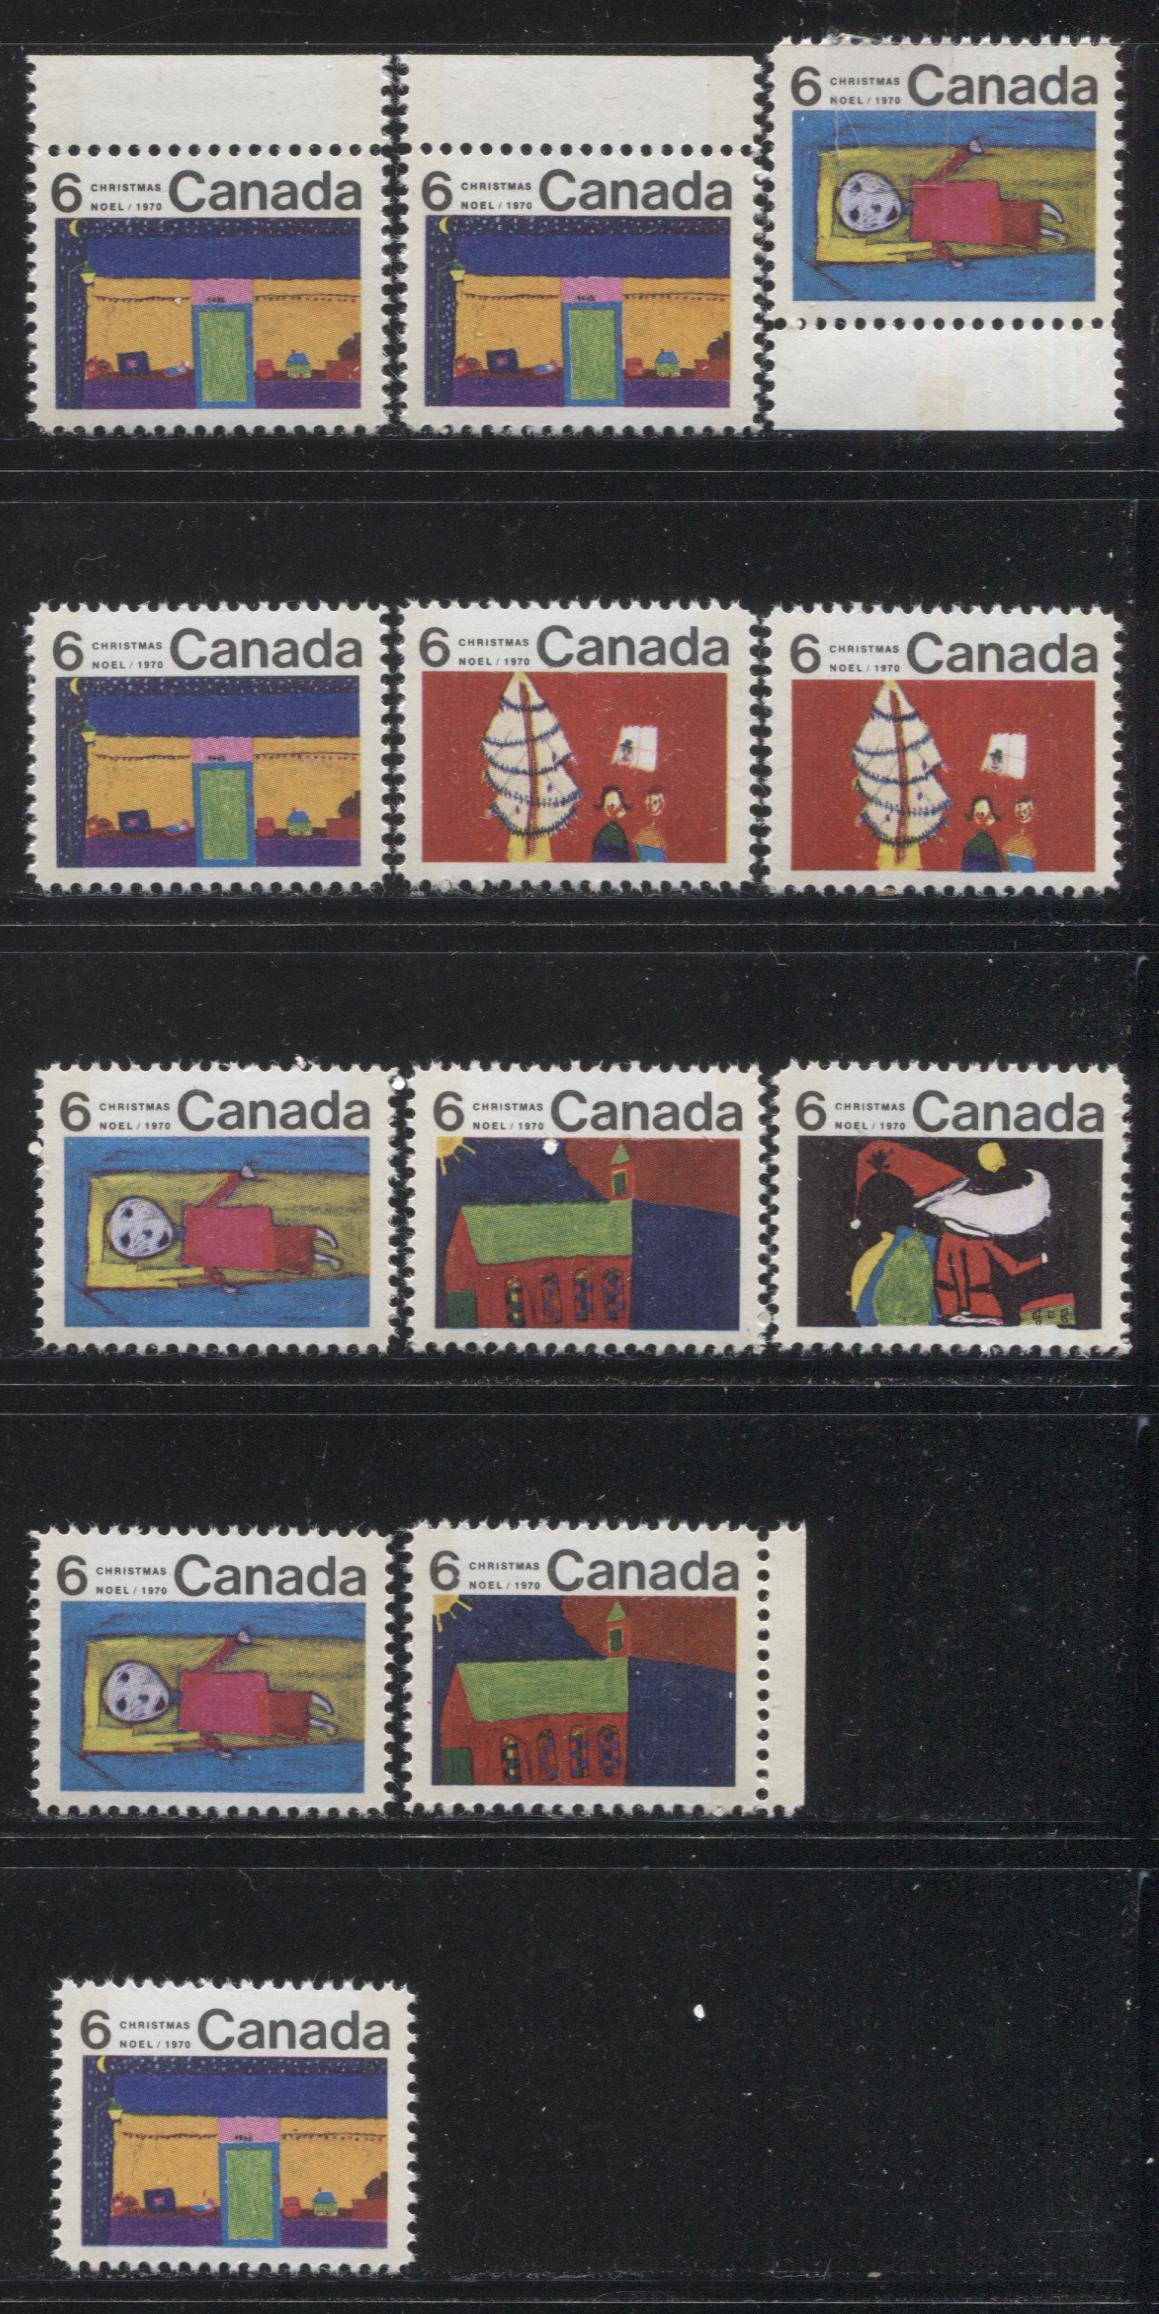 Lot 166 Canada #524p-528p 6c Multicoloured 1970 Christmas Issue, A Nearly Complete Set of 12 Winnipeg Tagged Constant Plate Varieties From Combination 4, Ribbed HB12 Paper, Perf. 11.9